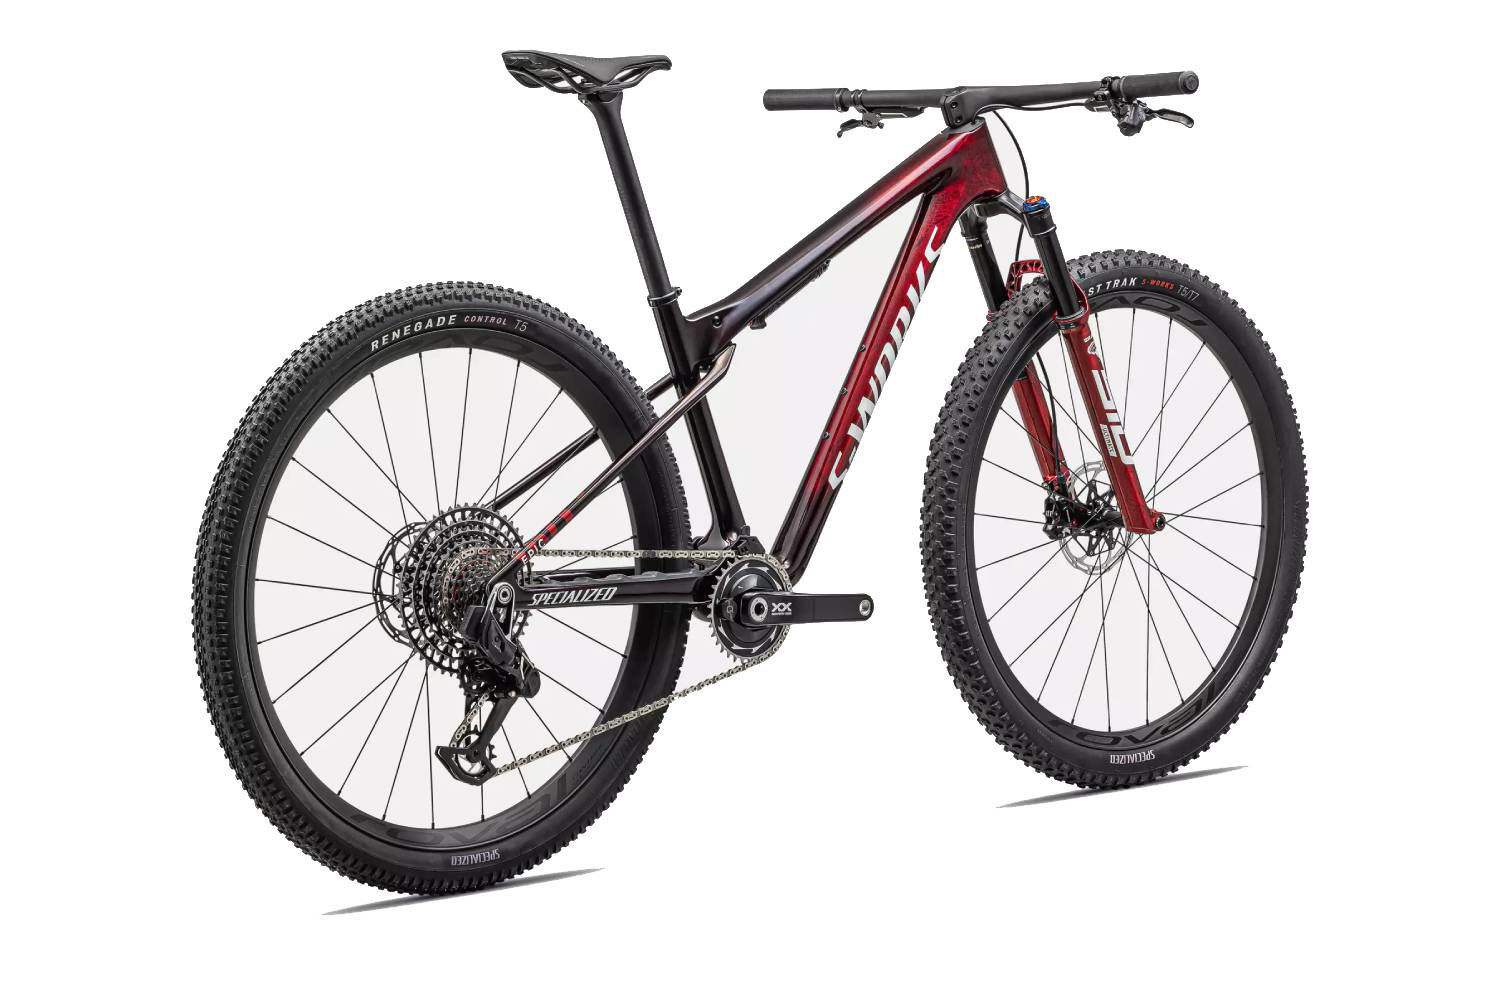 Immagine di SPECIALIZED Epic WC Pro Gloss Red Tint My23